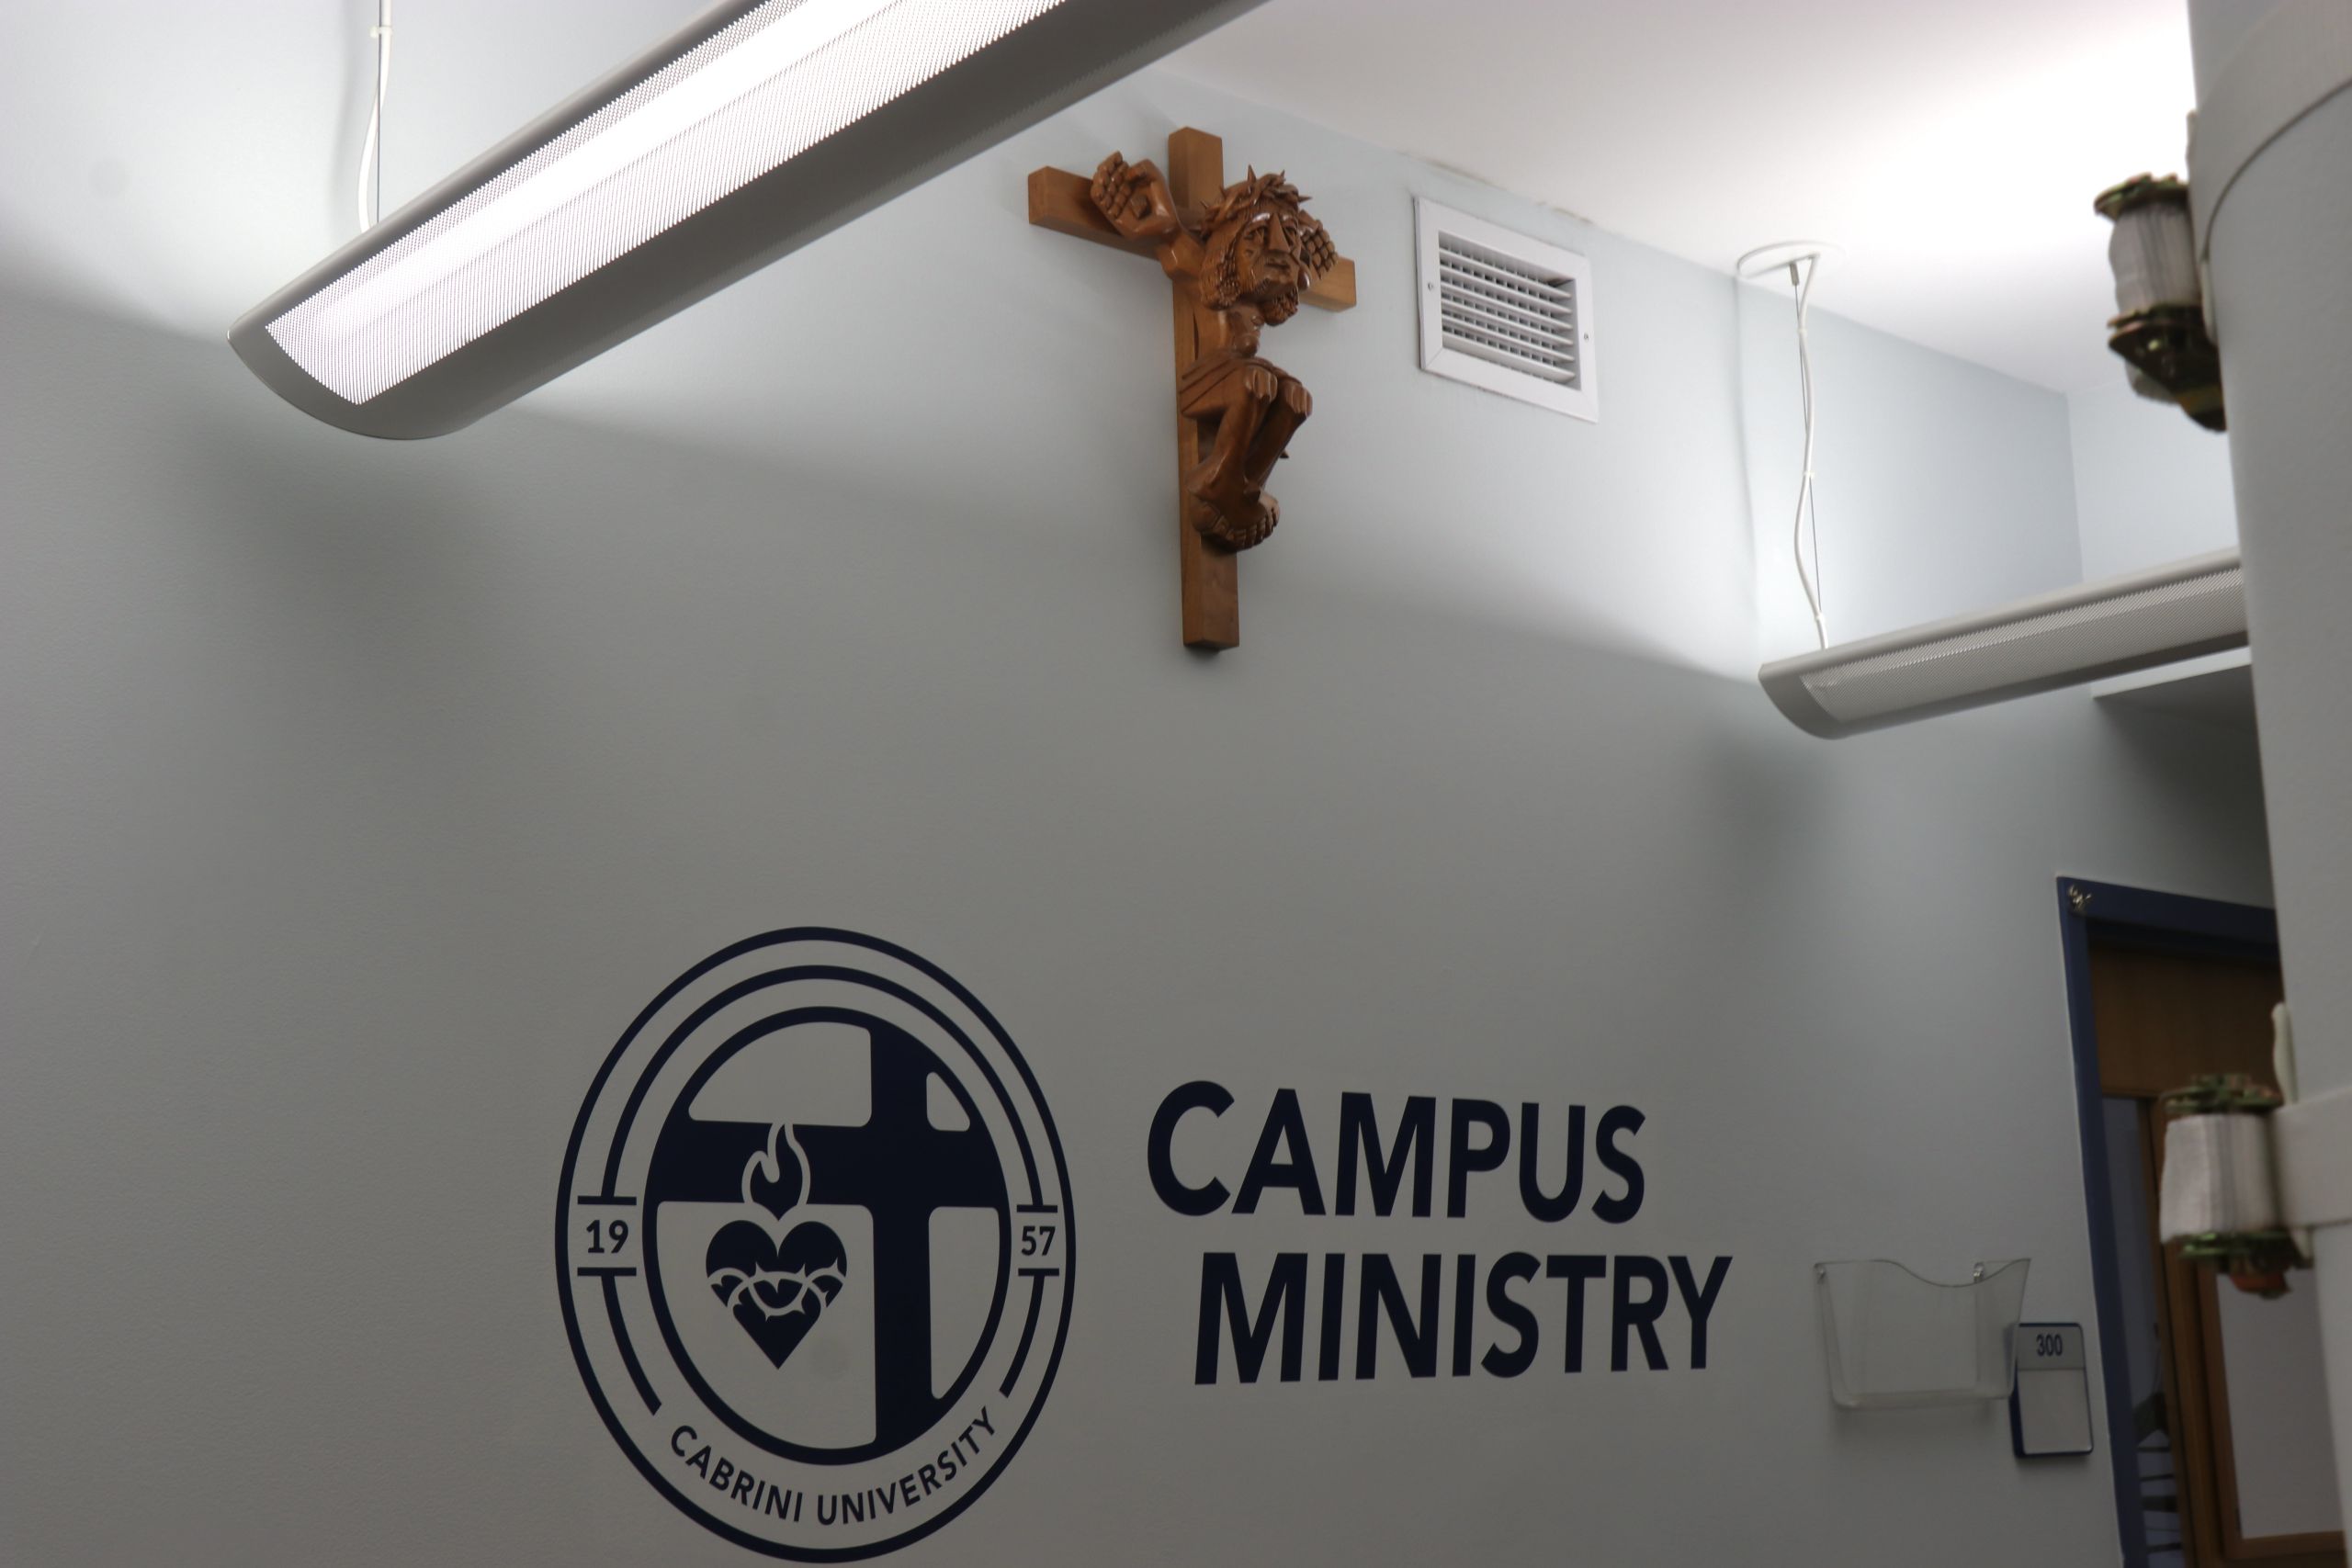 Campus Ministry. Photo by Erica Zebrowski.